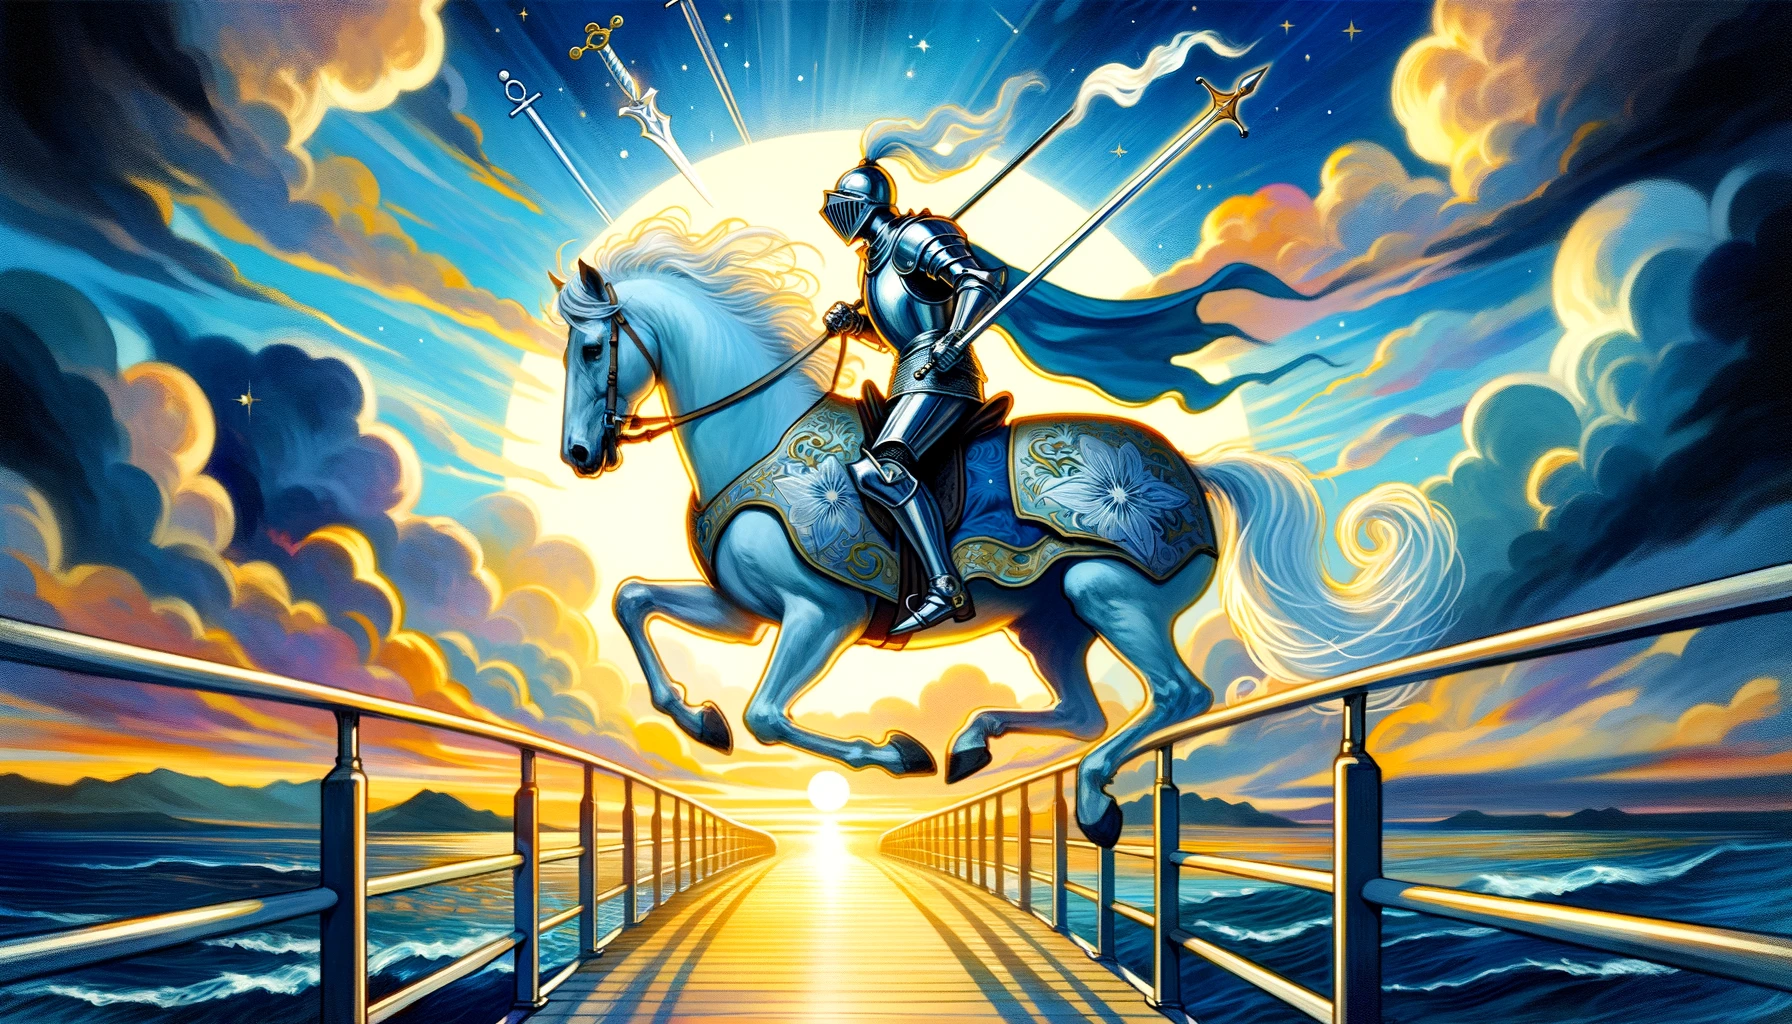 "An illustration representing dynamic change and clear communication in relationships, symbolized by the Knight of Swords tarot card, as a figure bravely confronts challenges amidst shifting weather, evoking themes of resolution and growth."